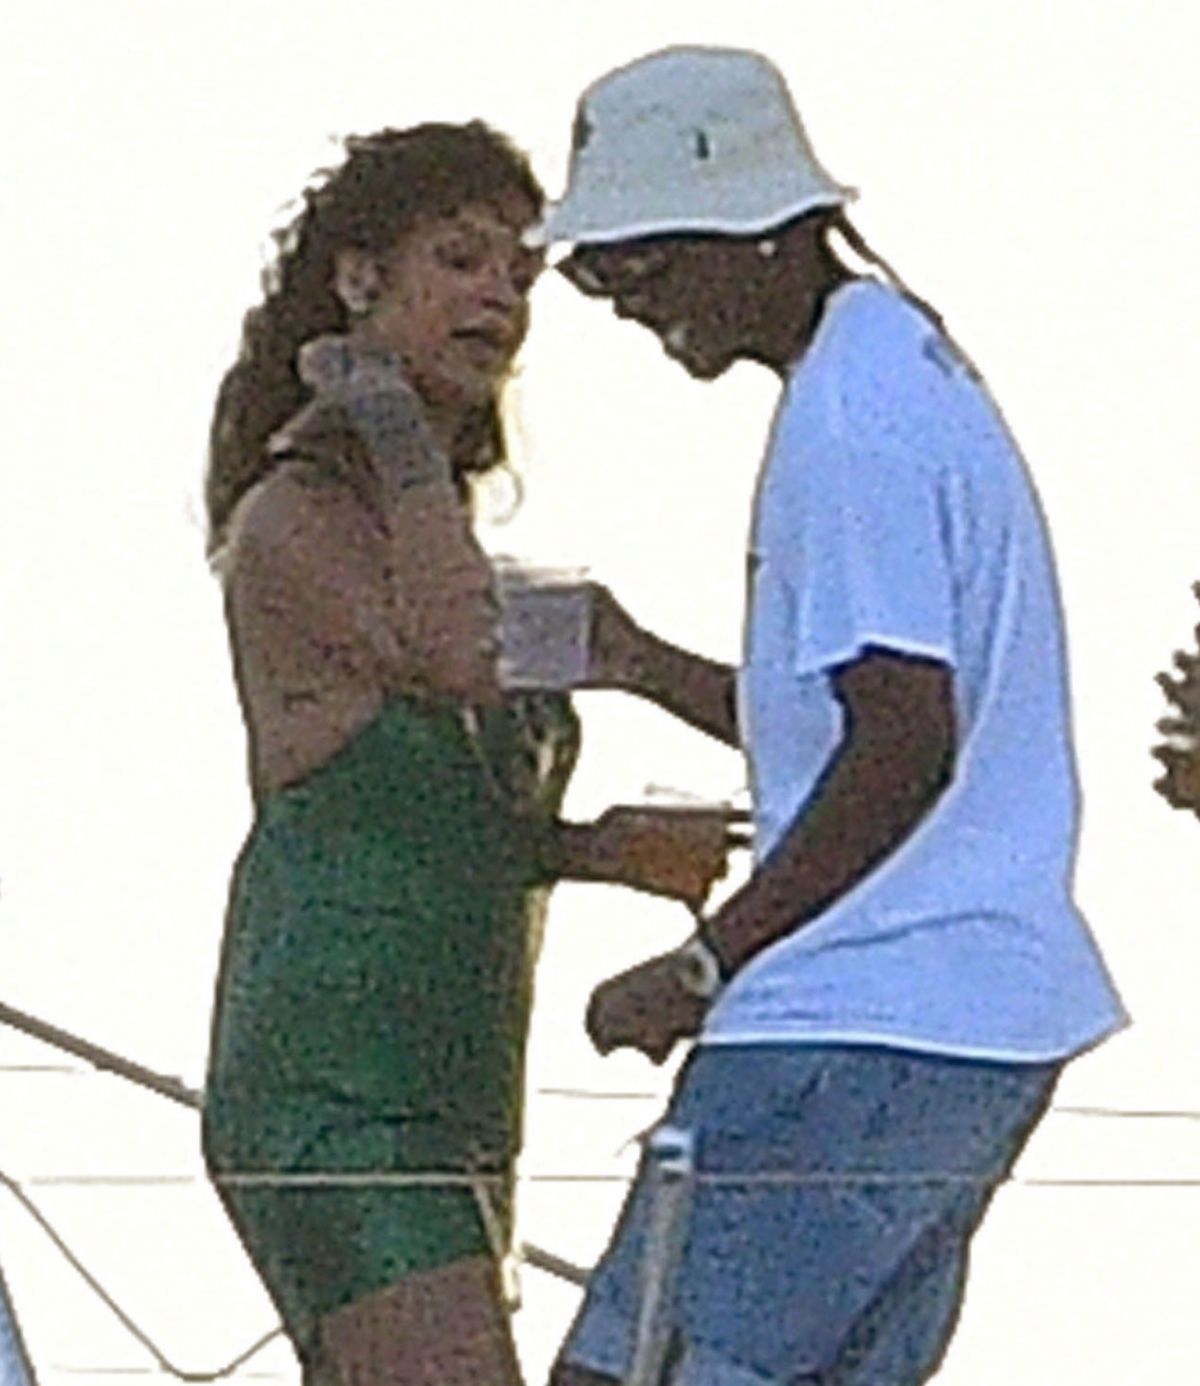 rihanna and asap rocky at a boat in